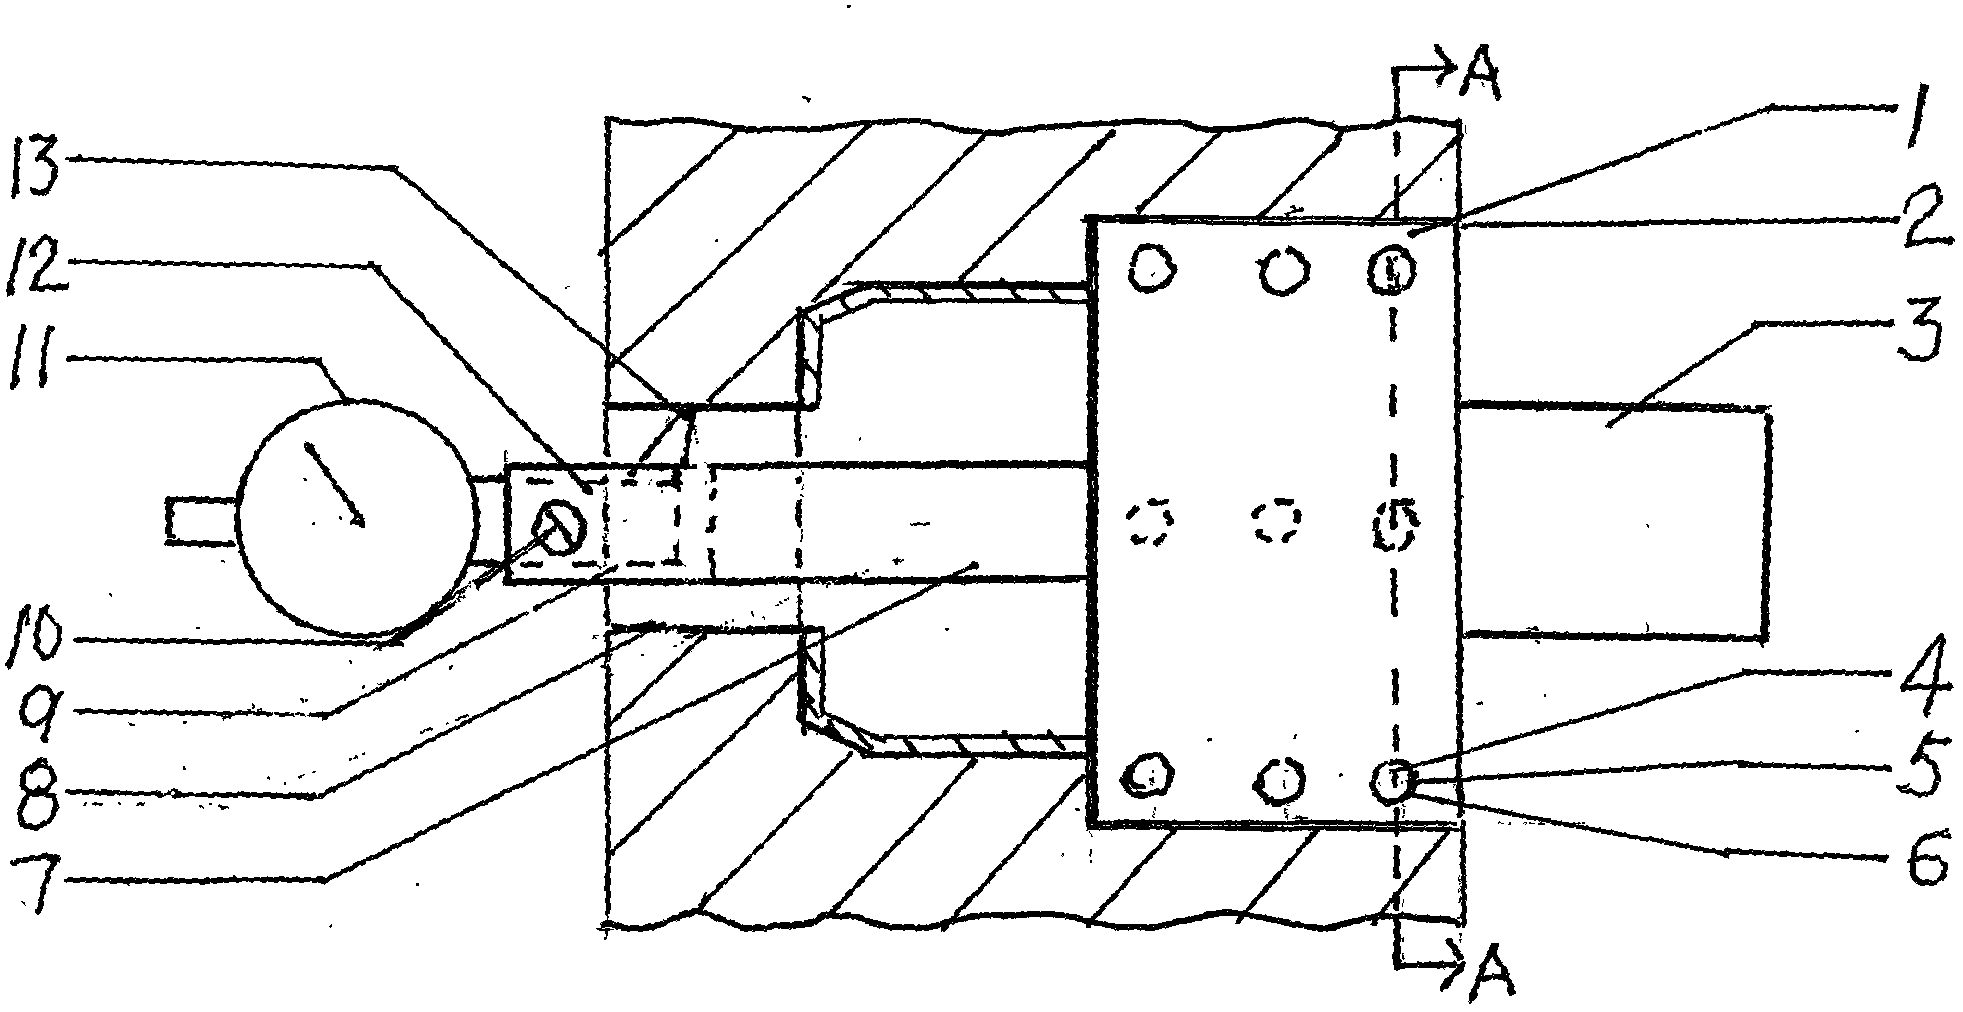 Device for measuring coaxiality of oil injector installation hole and oil injector head installation hole of cylinder cover